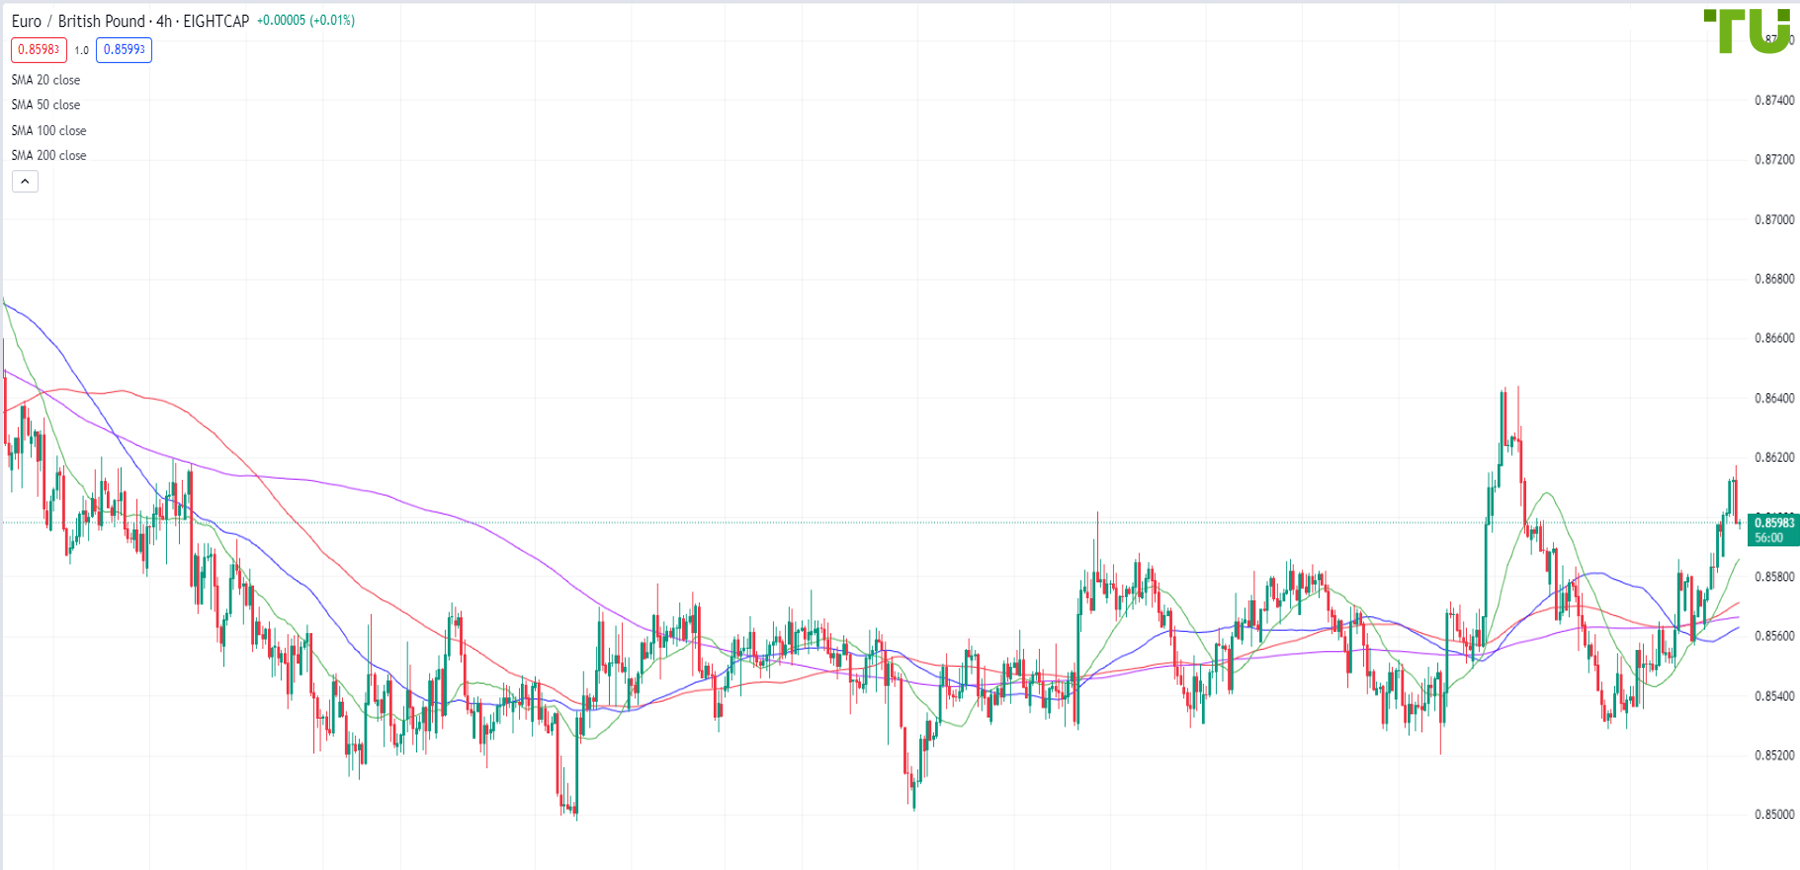 EUR/GBP is under pressure after rise